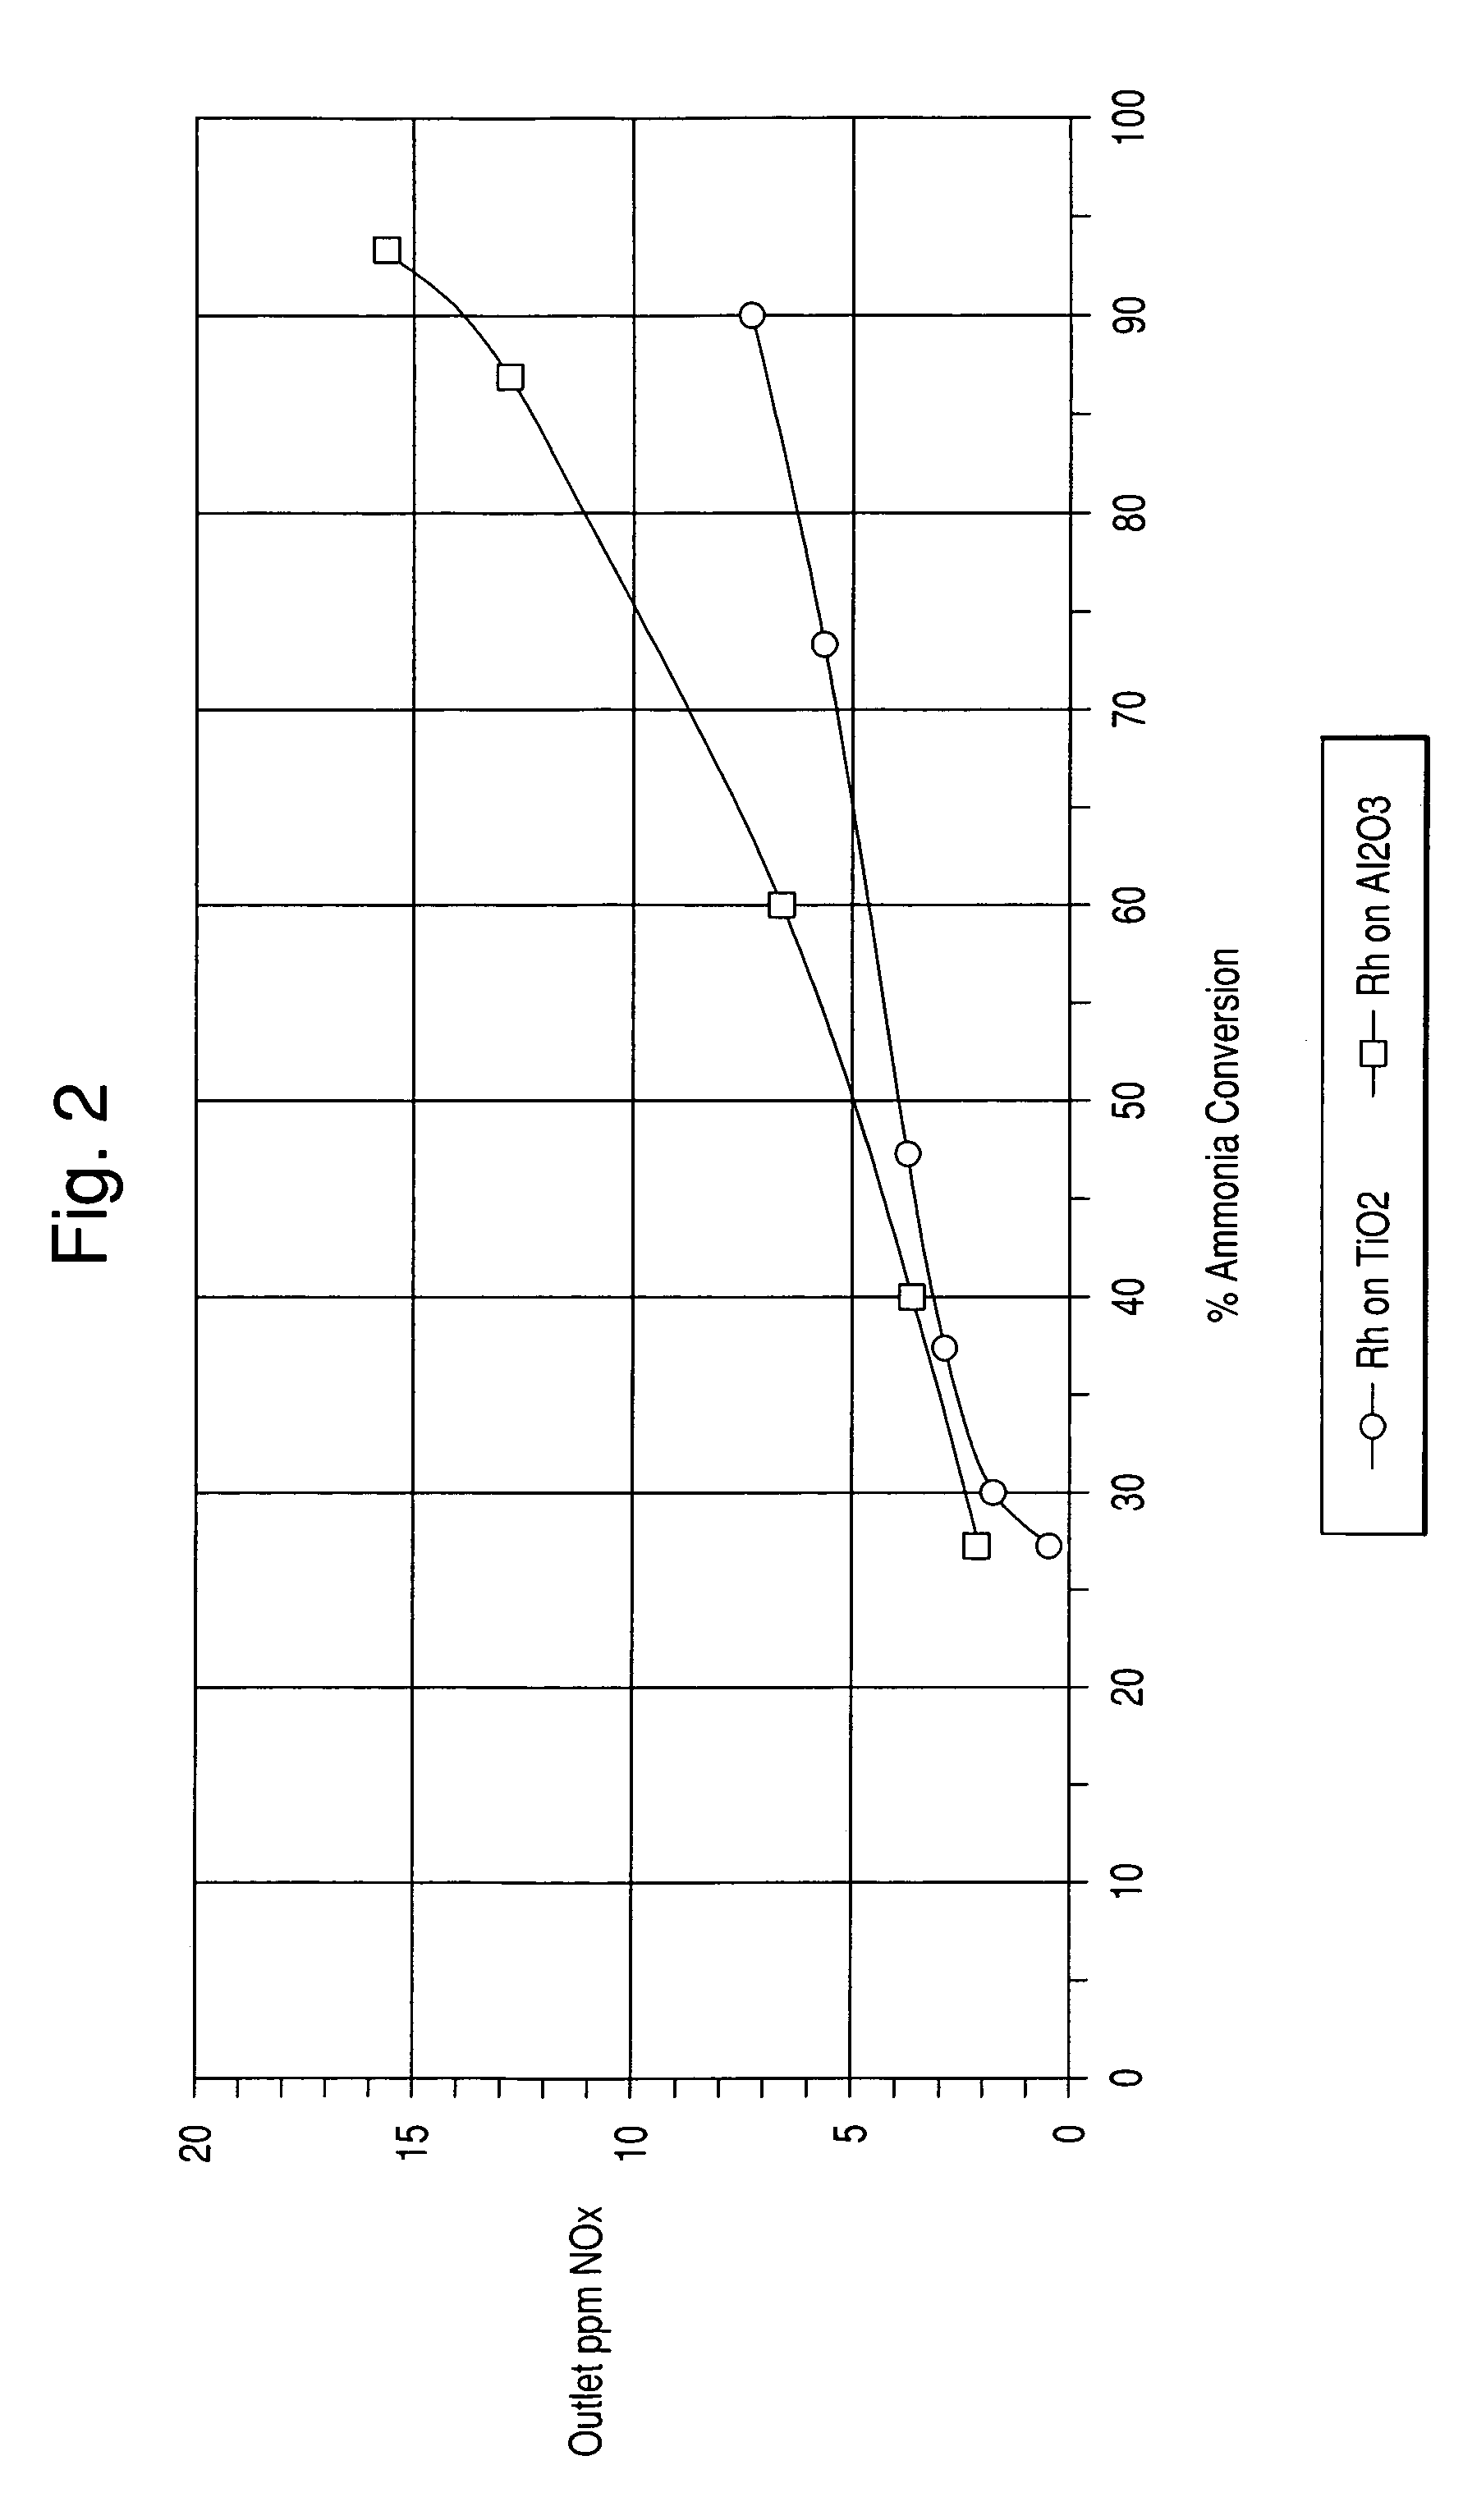 Ammonia oxidation catalyst for the coal fired utilities